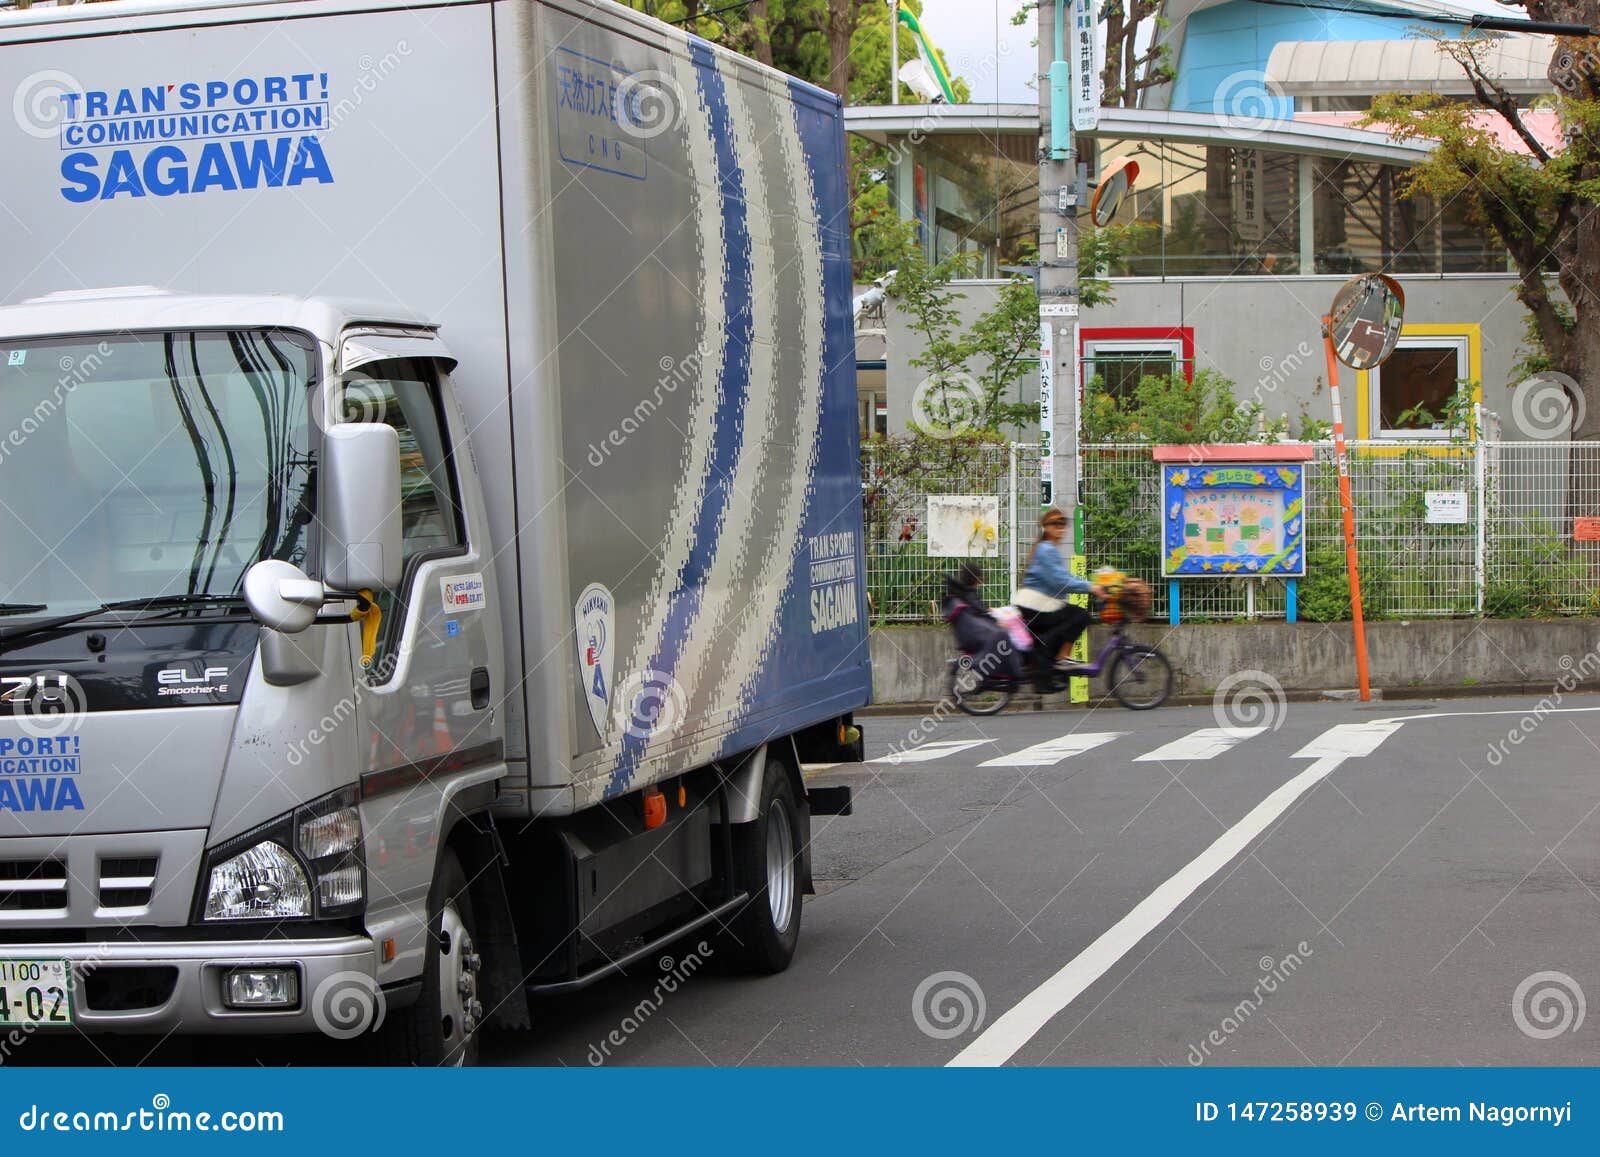 Moving Company Truck And A Bicycle Editorial Stock Image - Image of ...